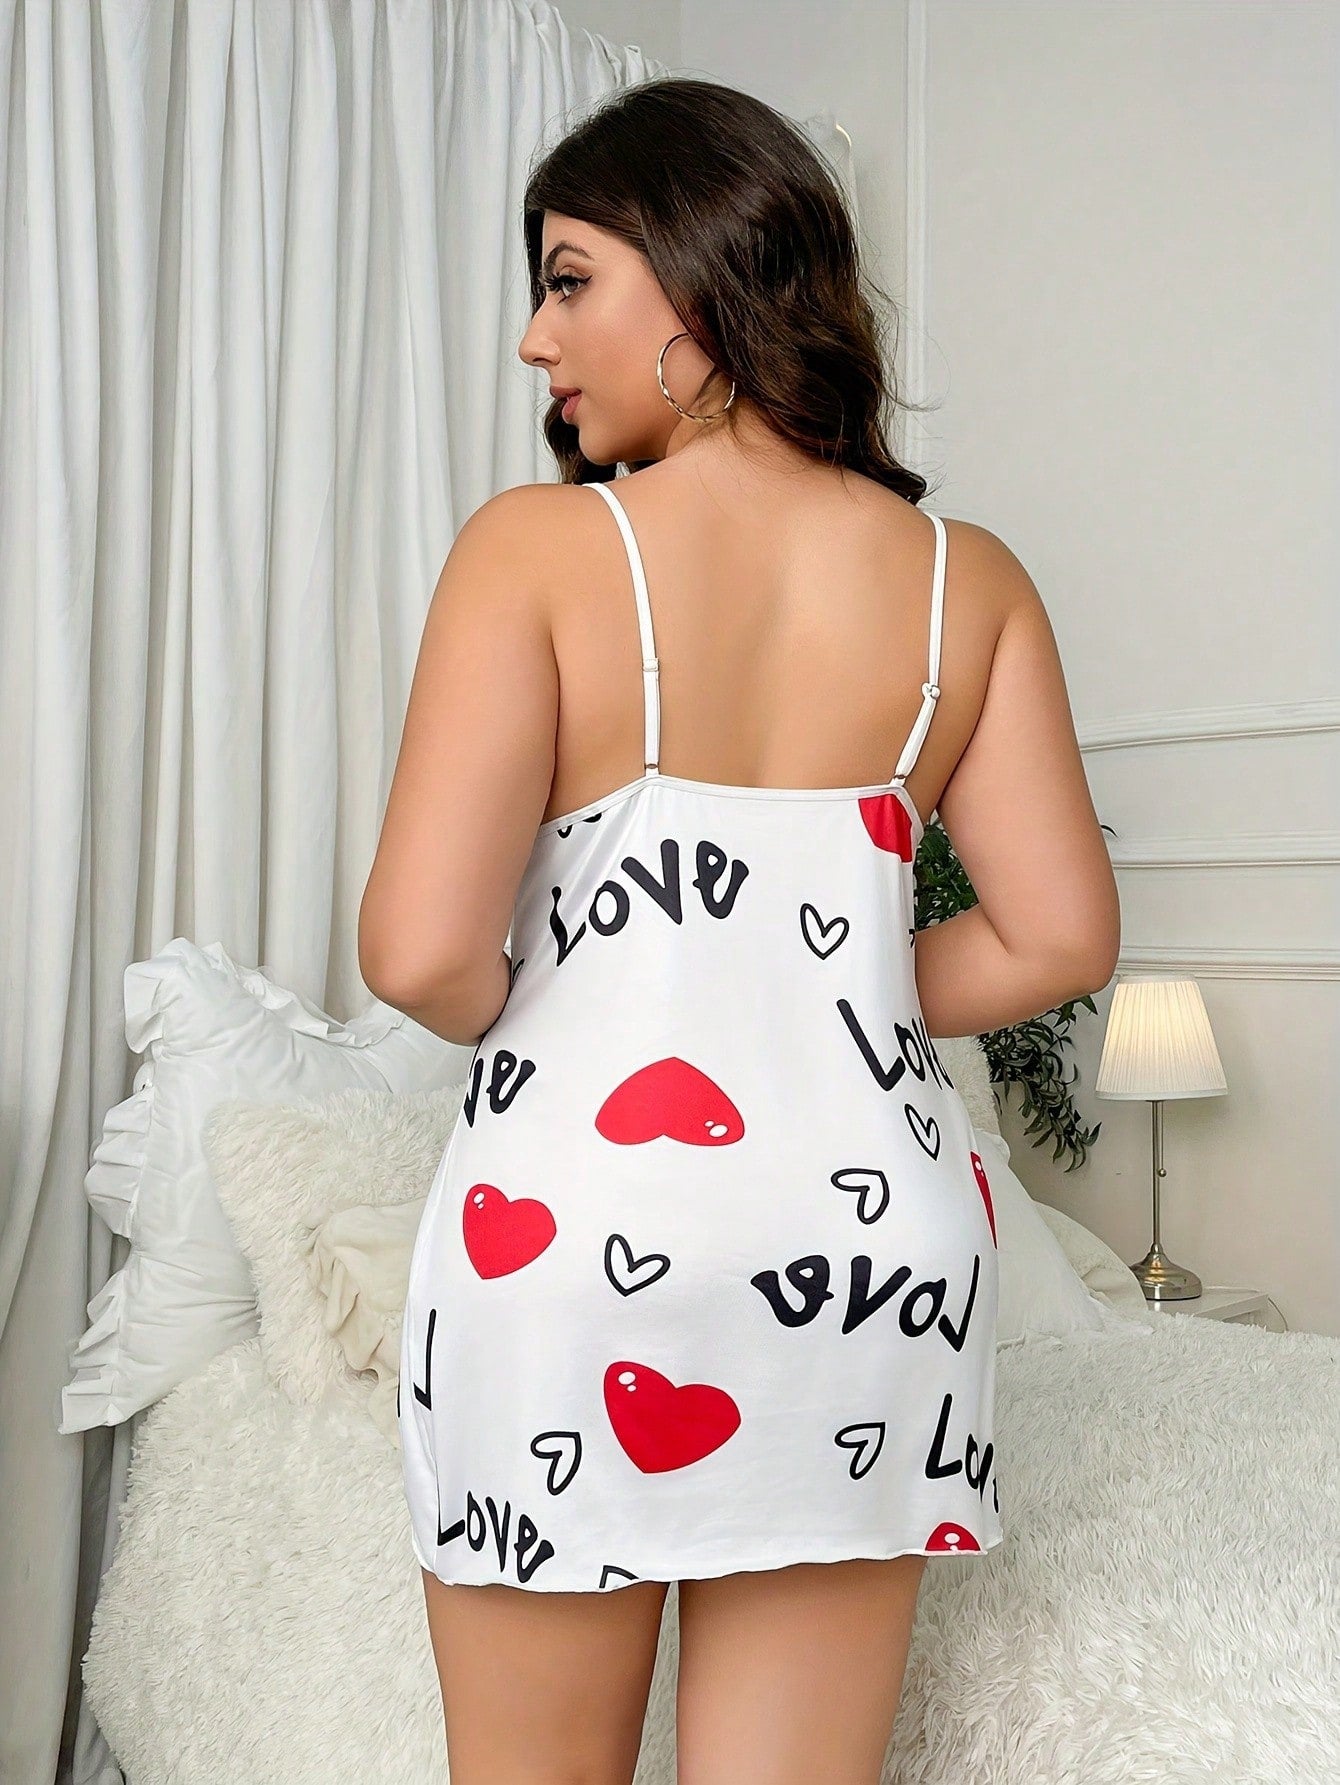 Sweetheart Dreams: Love & Heart Lace Trimmed Cami Nightgown